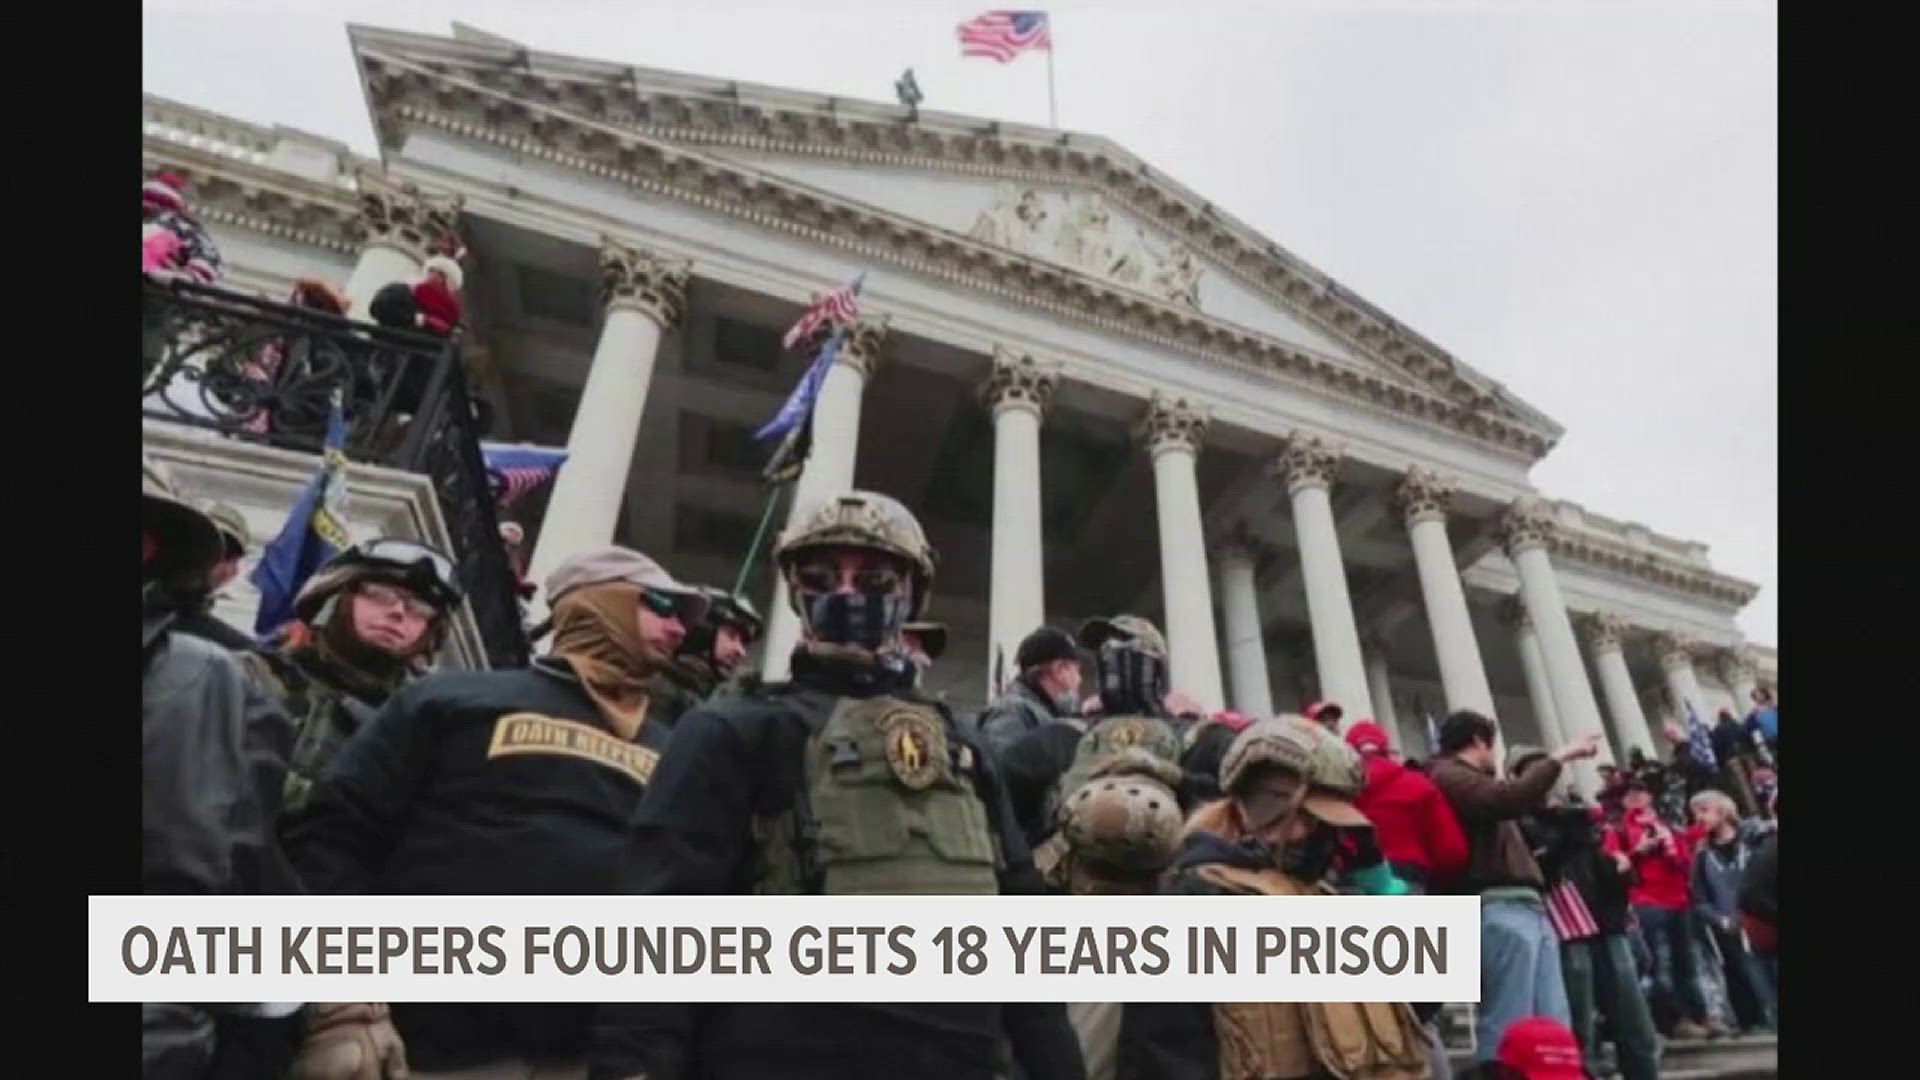 Oath Keepers founder Stewart Rhodes has been sentenced to 18 years in prison for seditious conspiracy in the January 6th riot.